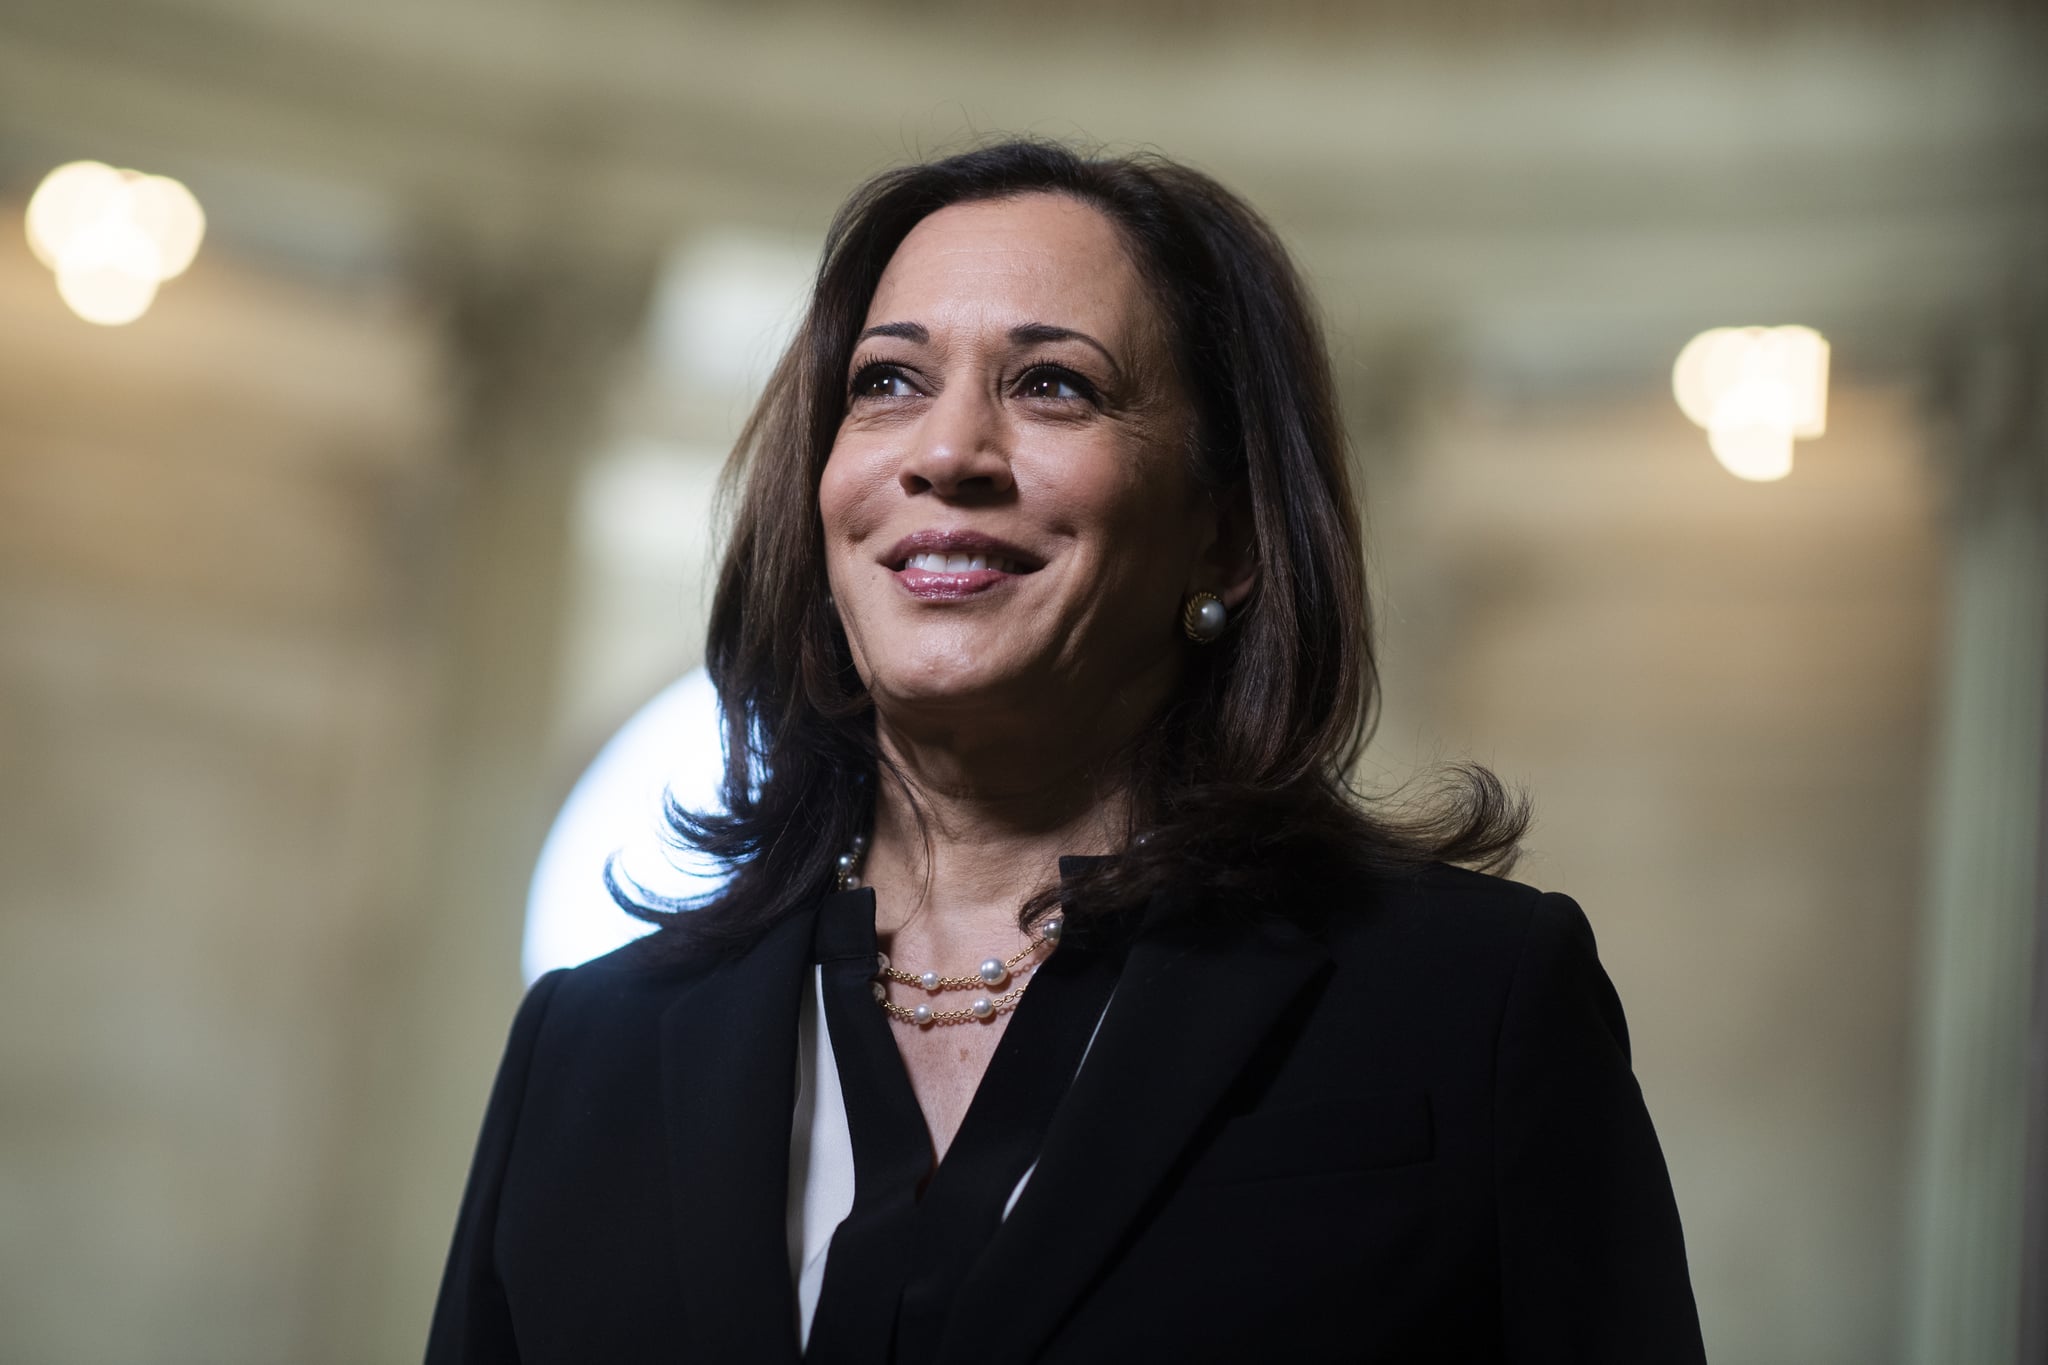 UNITED STATES - JUNE 24: Sen. Kamala Harris, D-Calif., is seen after an interview in Russell Building on Wednesday, June 24, 2020. (Photo By Tom Williams/CQ-Roll Call, Inc via Getty Images)